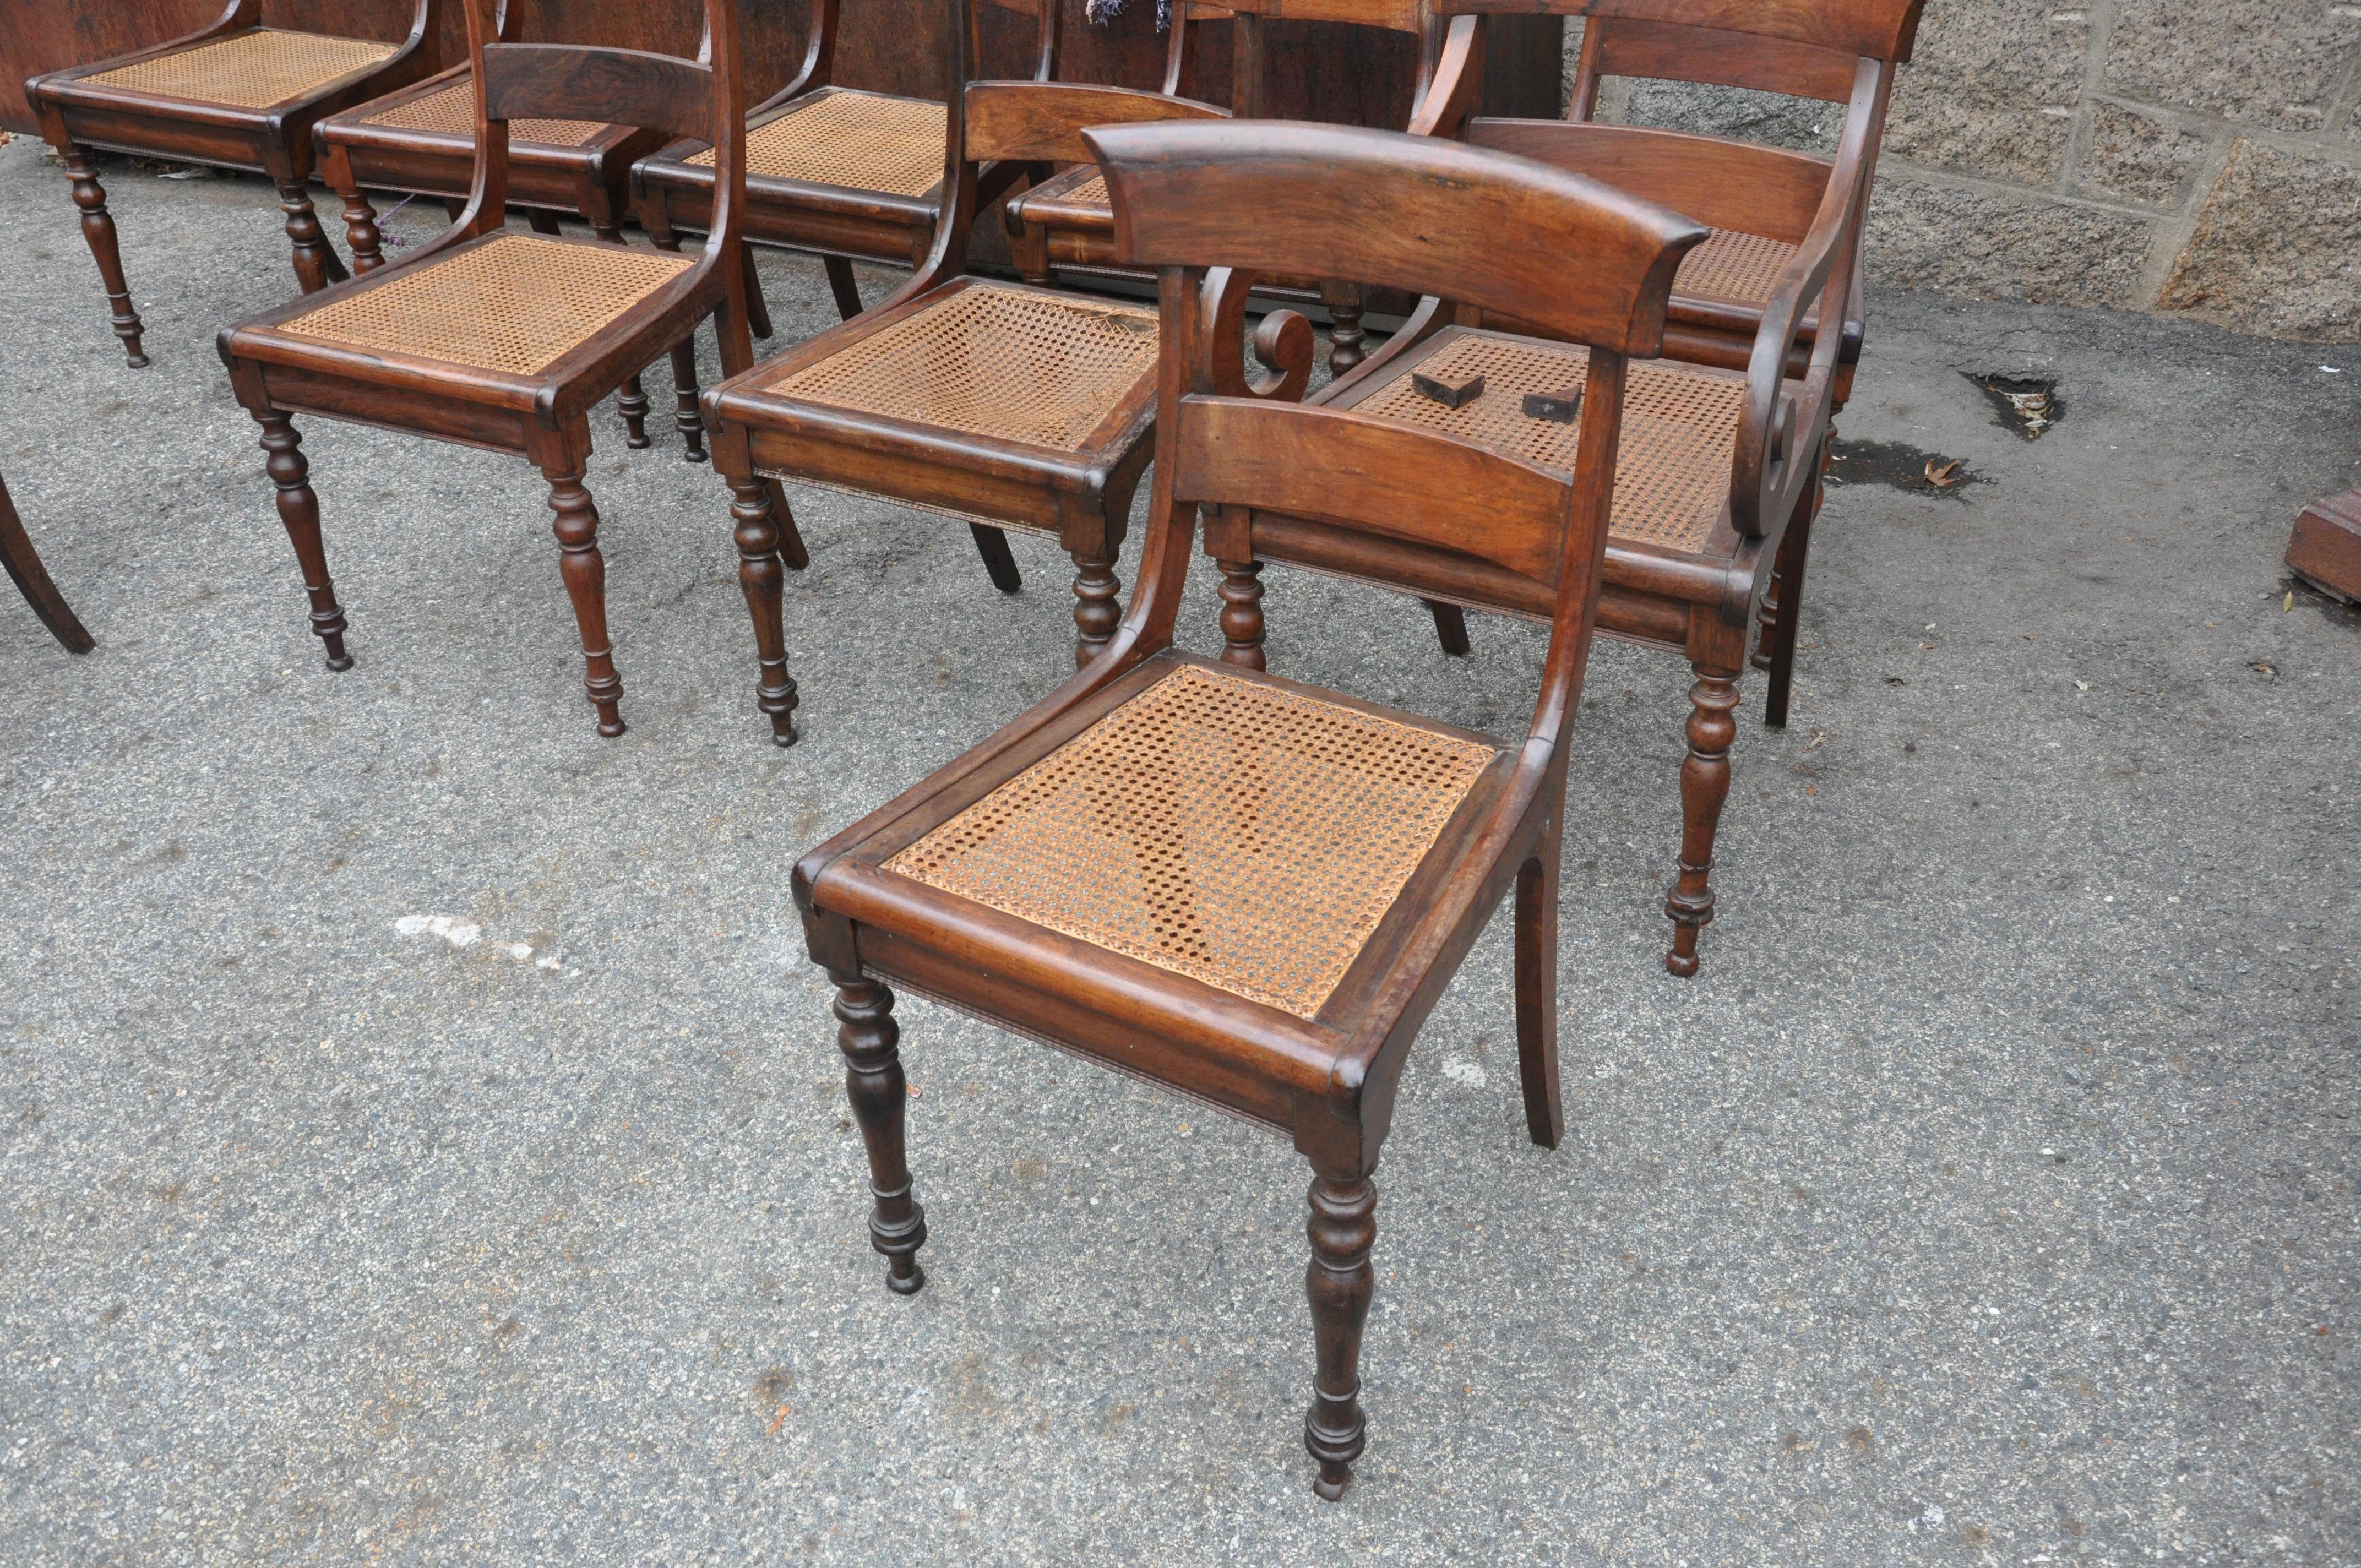 Set of 10 Anglo Regency dining chairs of klismos form. Caned seats. Well molded back. Rosewood and turned legs. Original finish. Good size and proportion, sturdy. One armchair and nine side chairs.

Would have had a loose seat cushion/pillow which